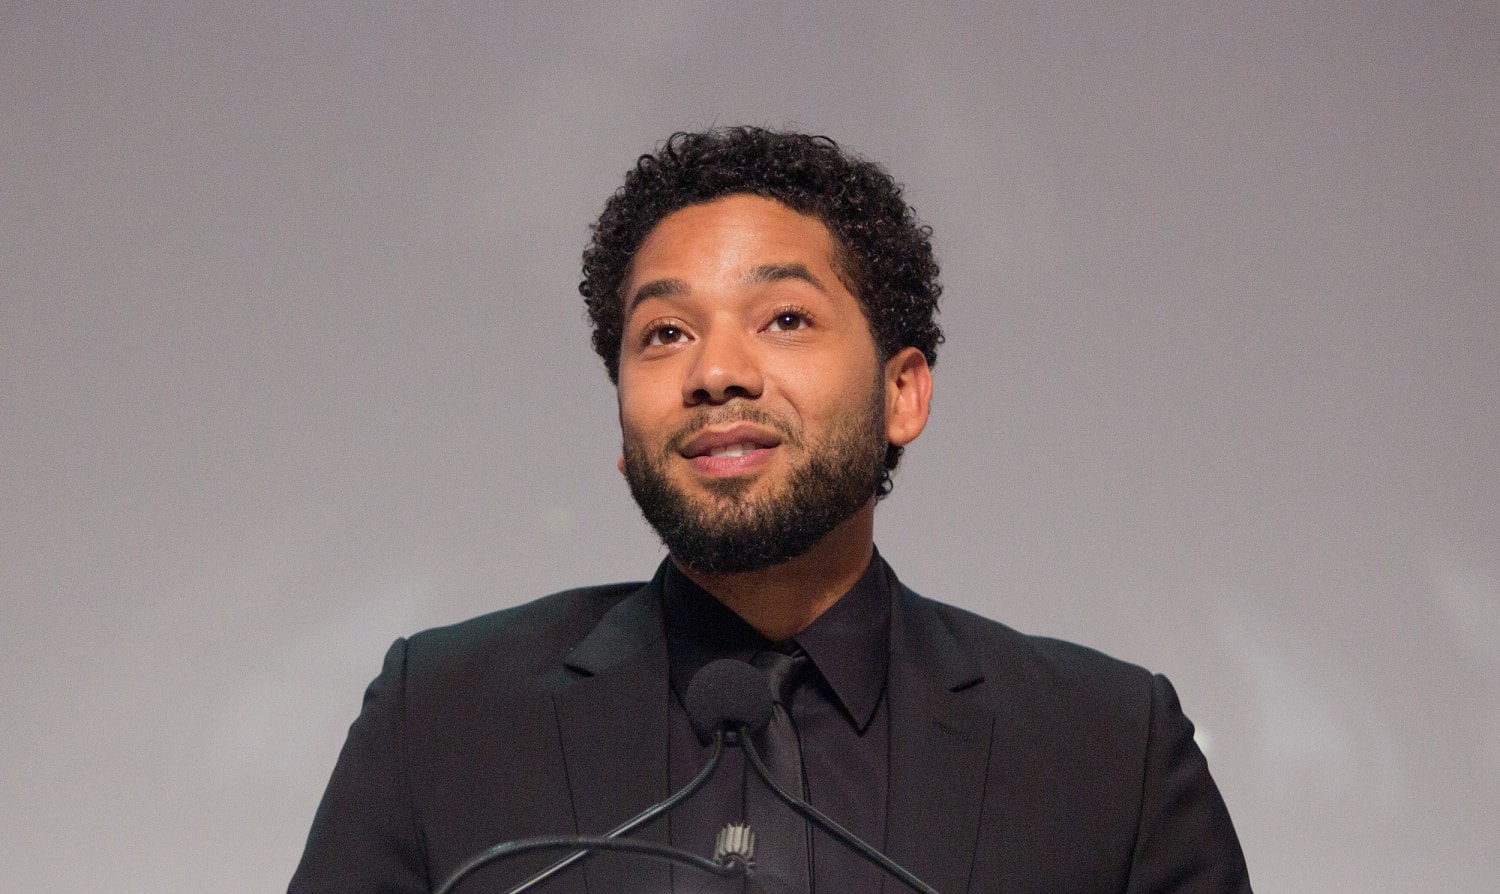 Jussie Smollett charged with felony for alleged false report of hate-crime attack2500 x 1490